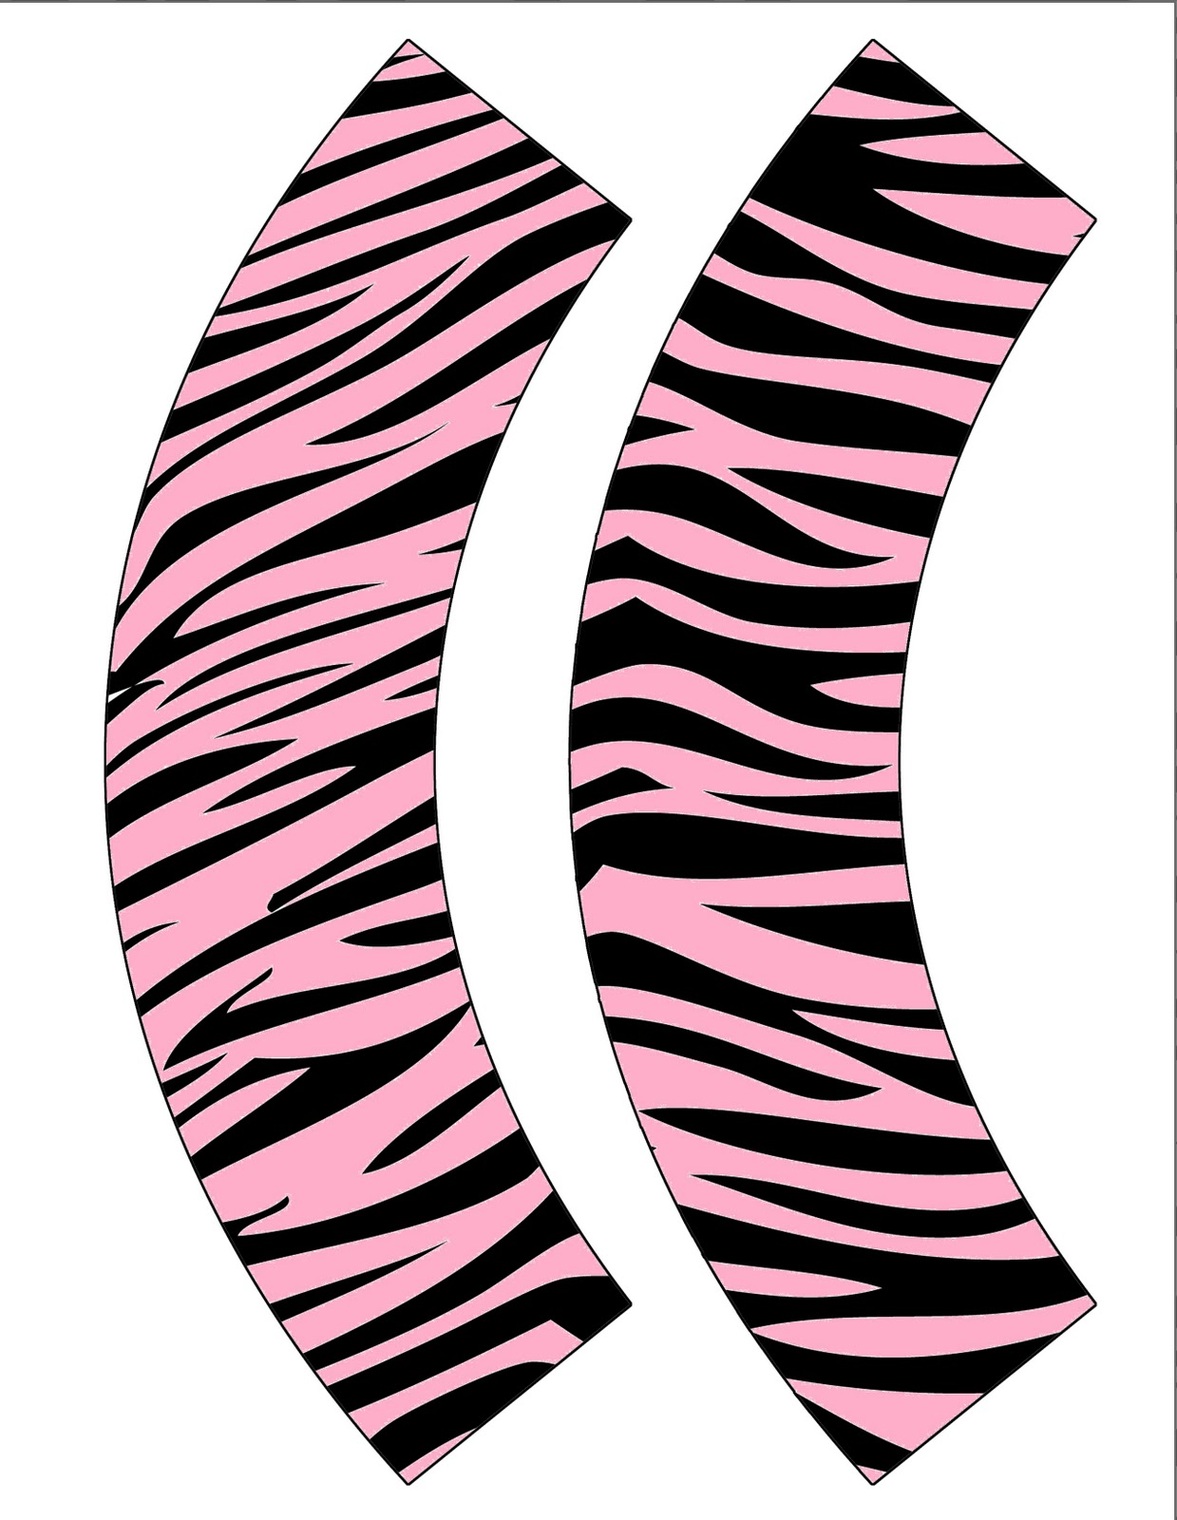 Pink Zebra Print Background Clipart - Free to use Clip Art Resource